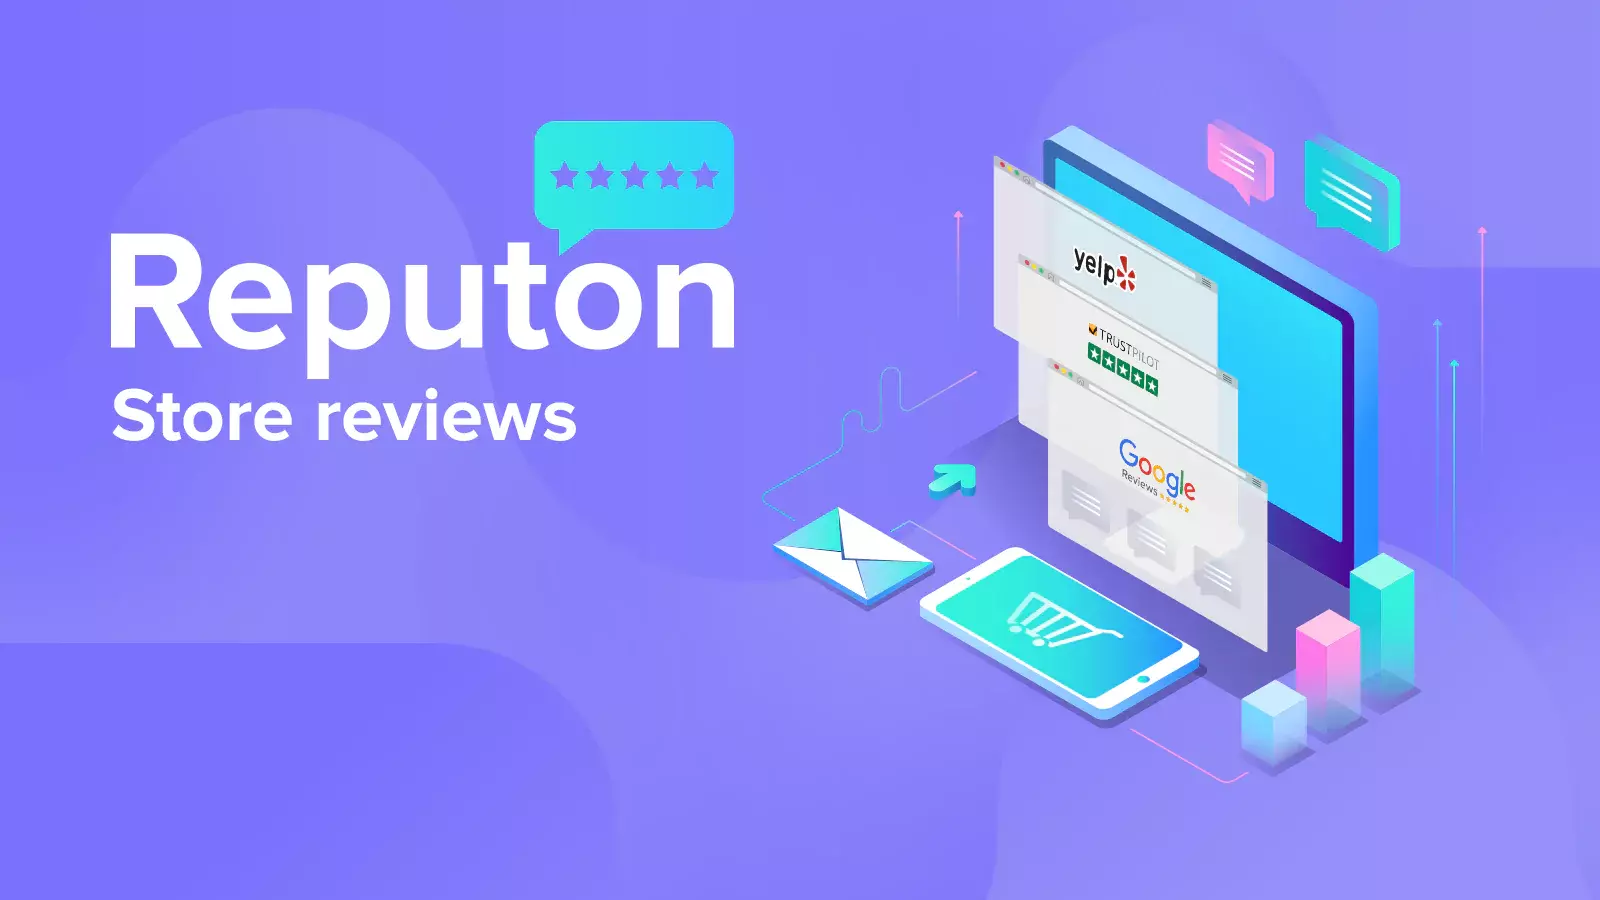 Reputon will enhance the reputation of your online store